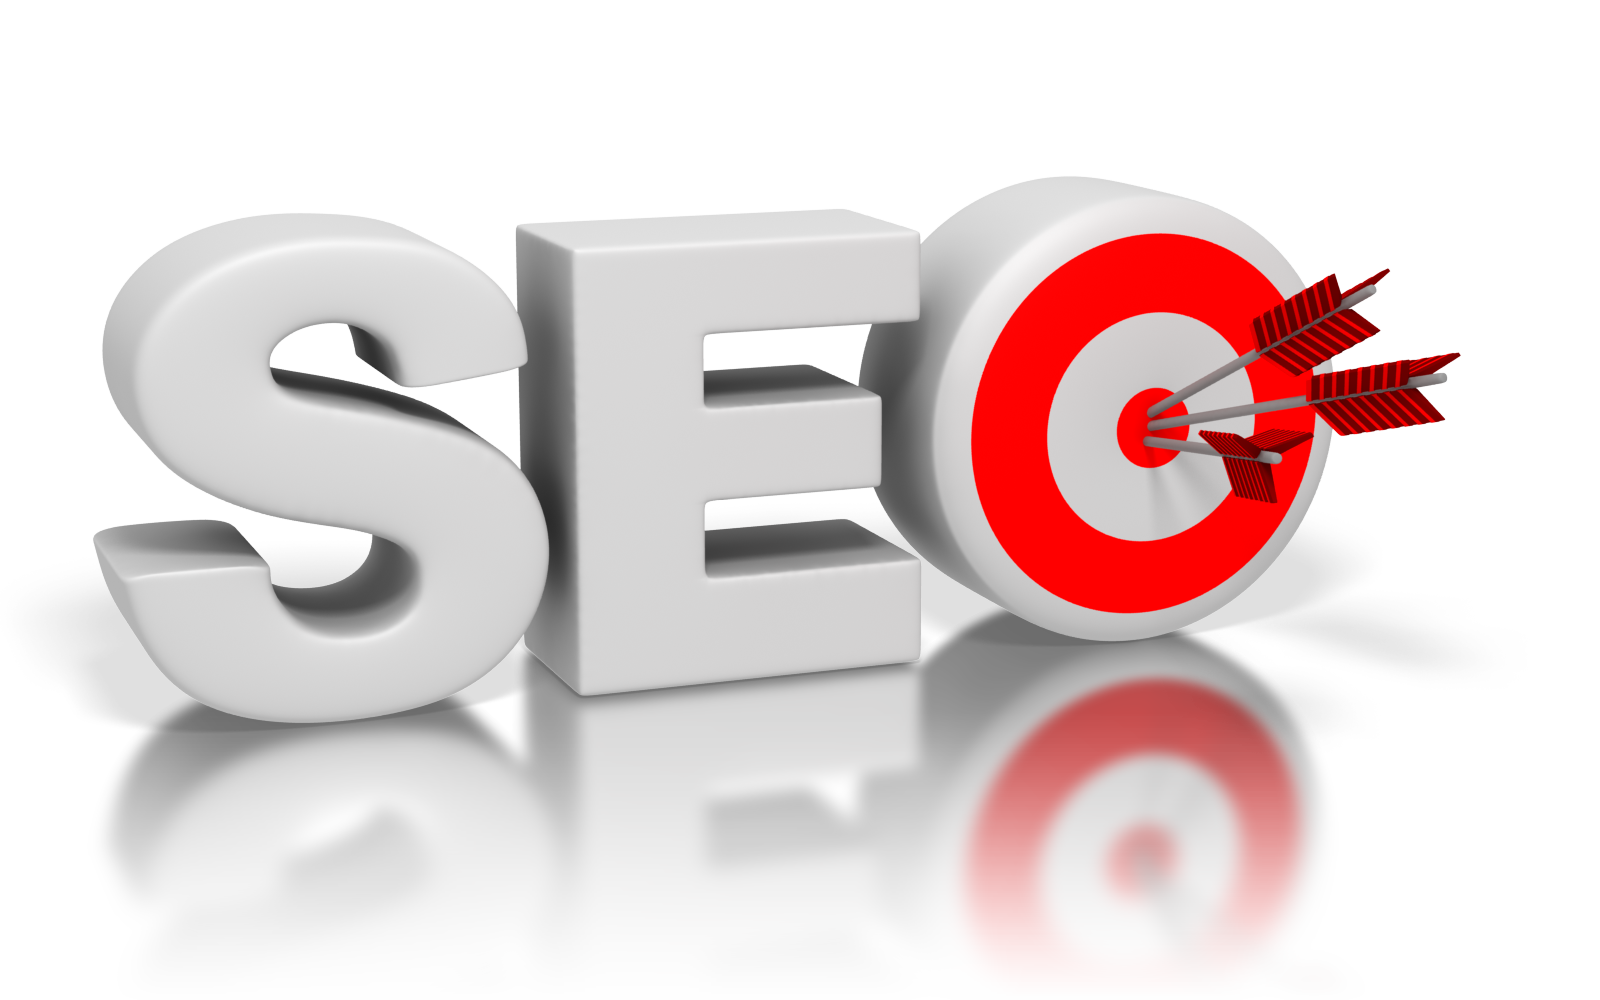 course in seo